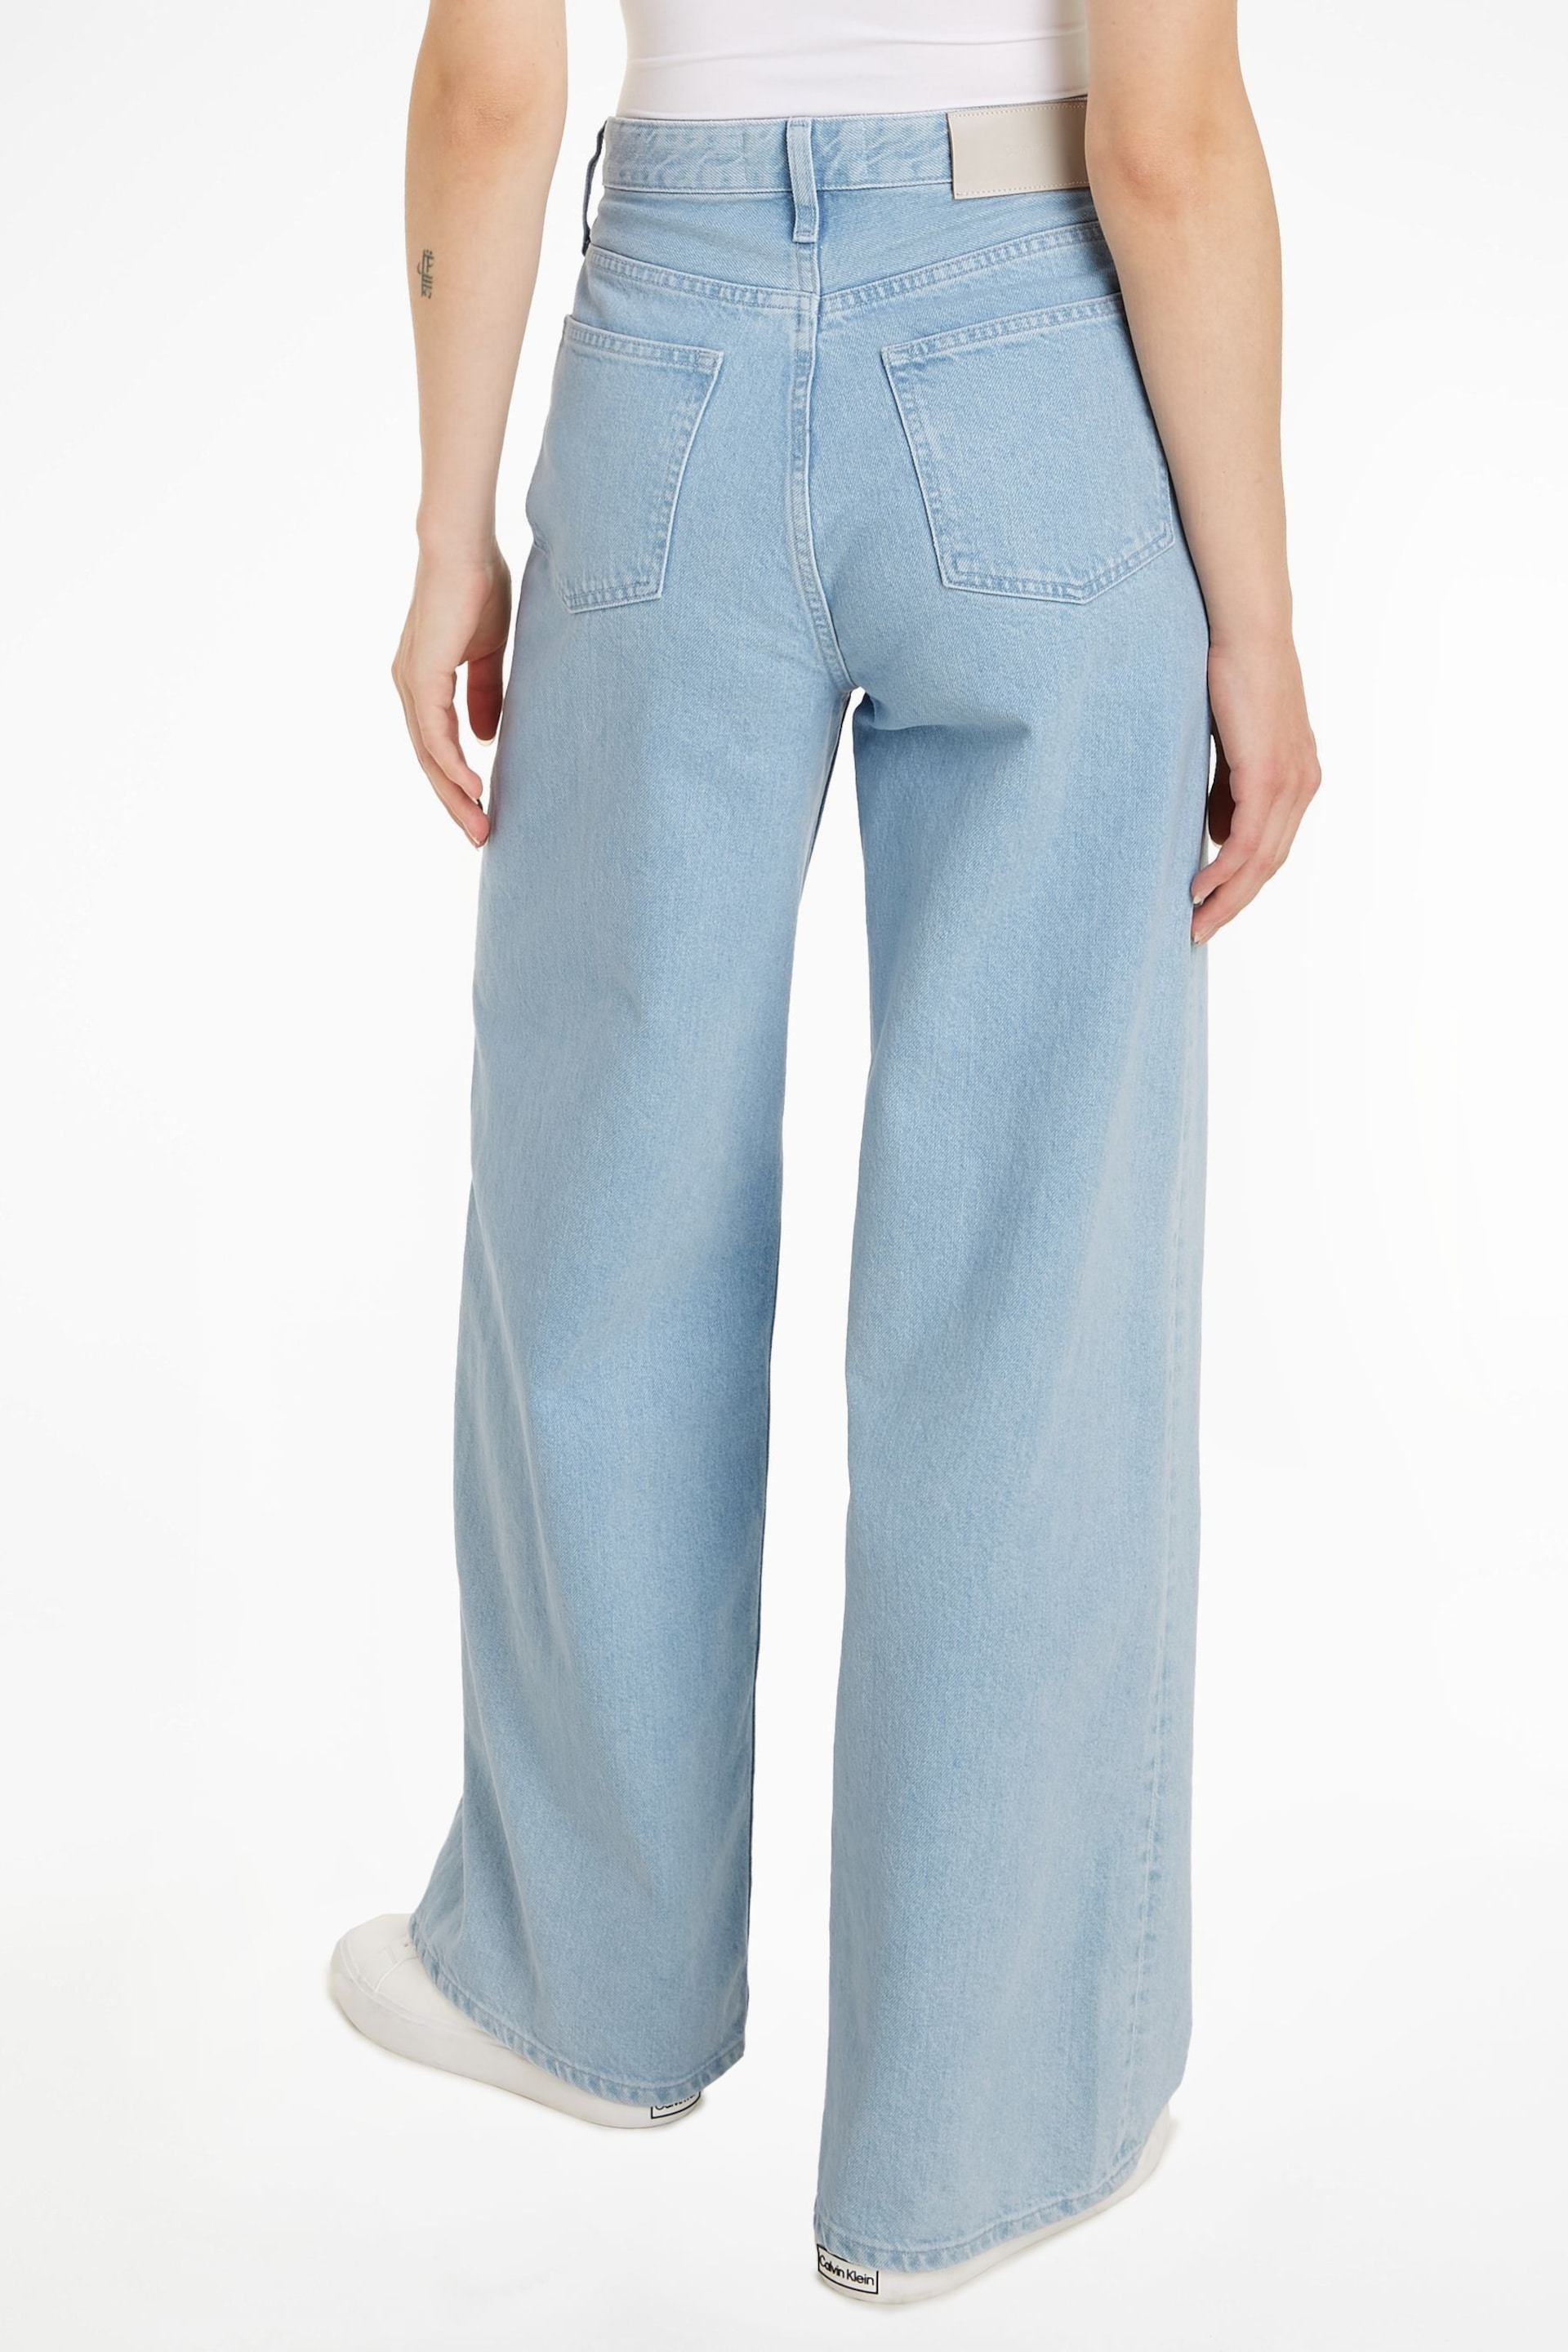 Calvin Klein Jeans High Rise Relaxed Jeans - Image 3 of 5